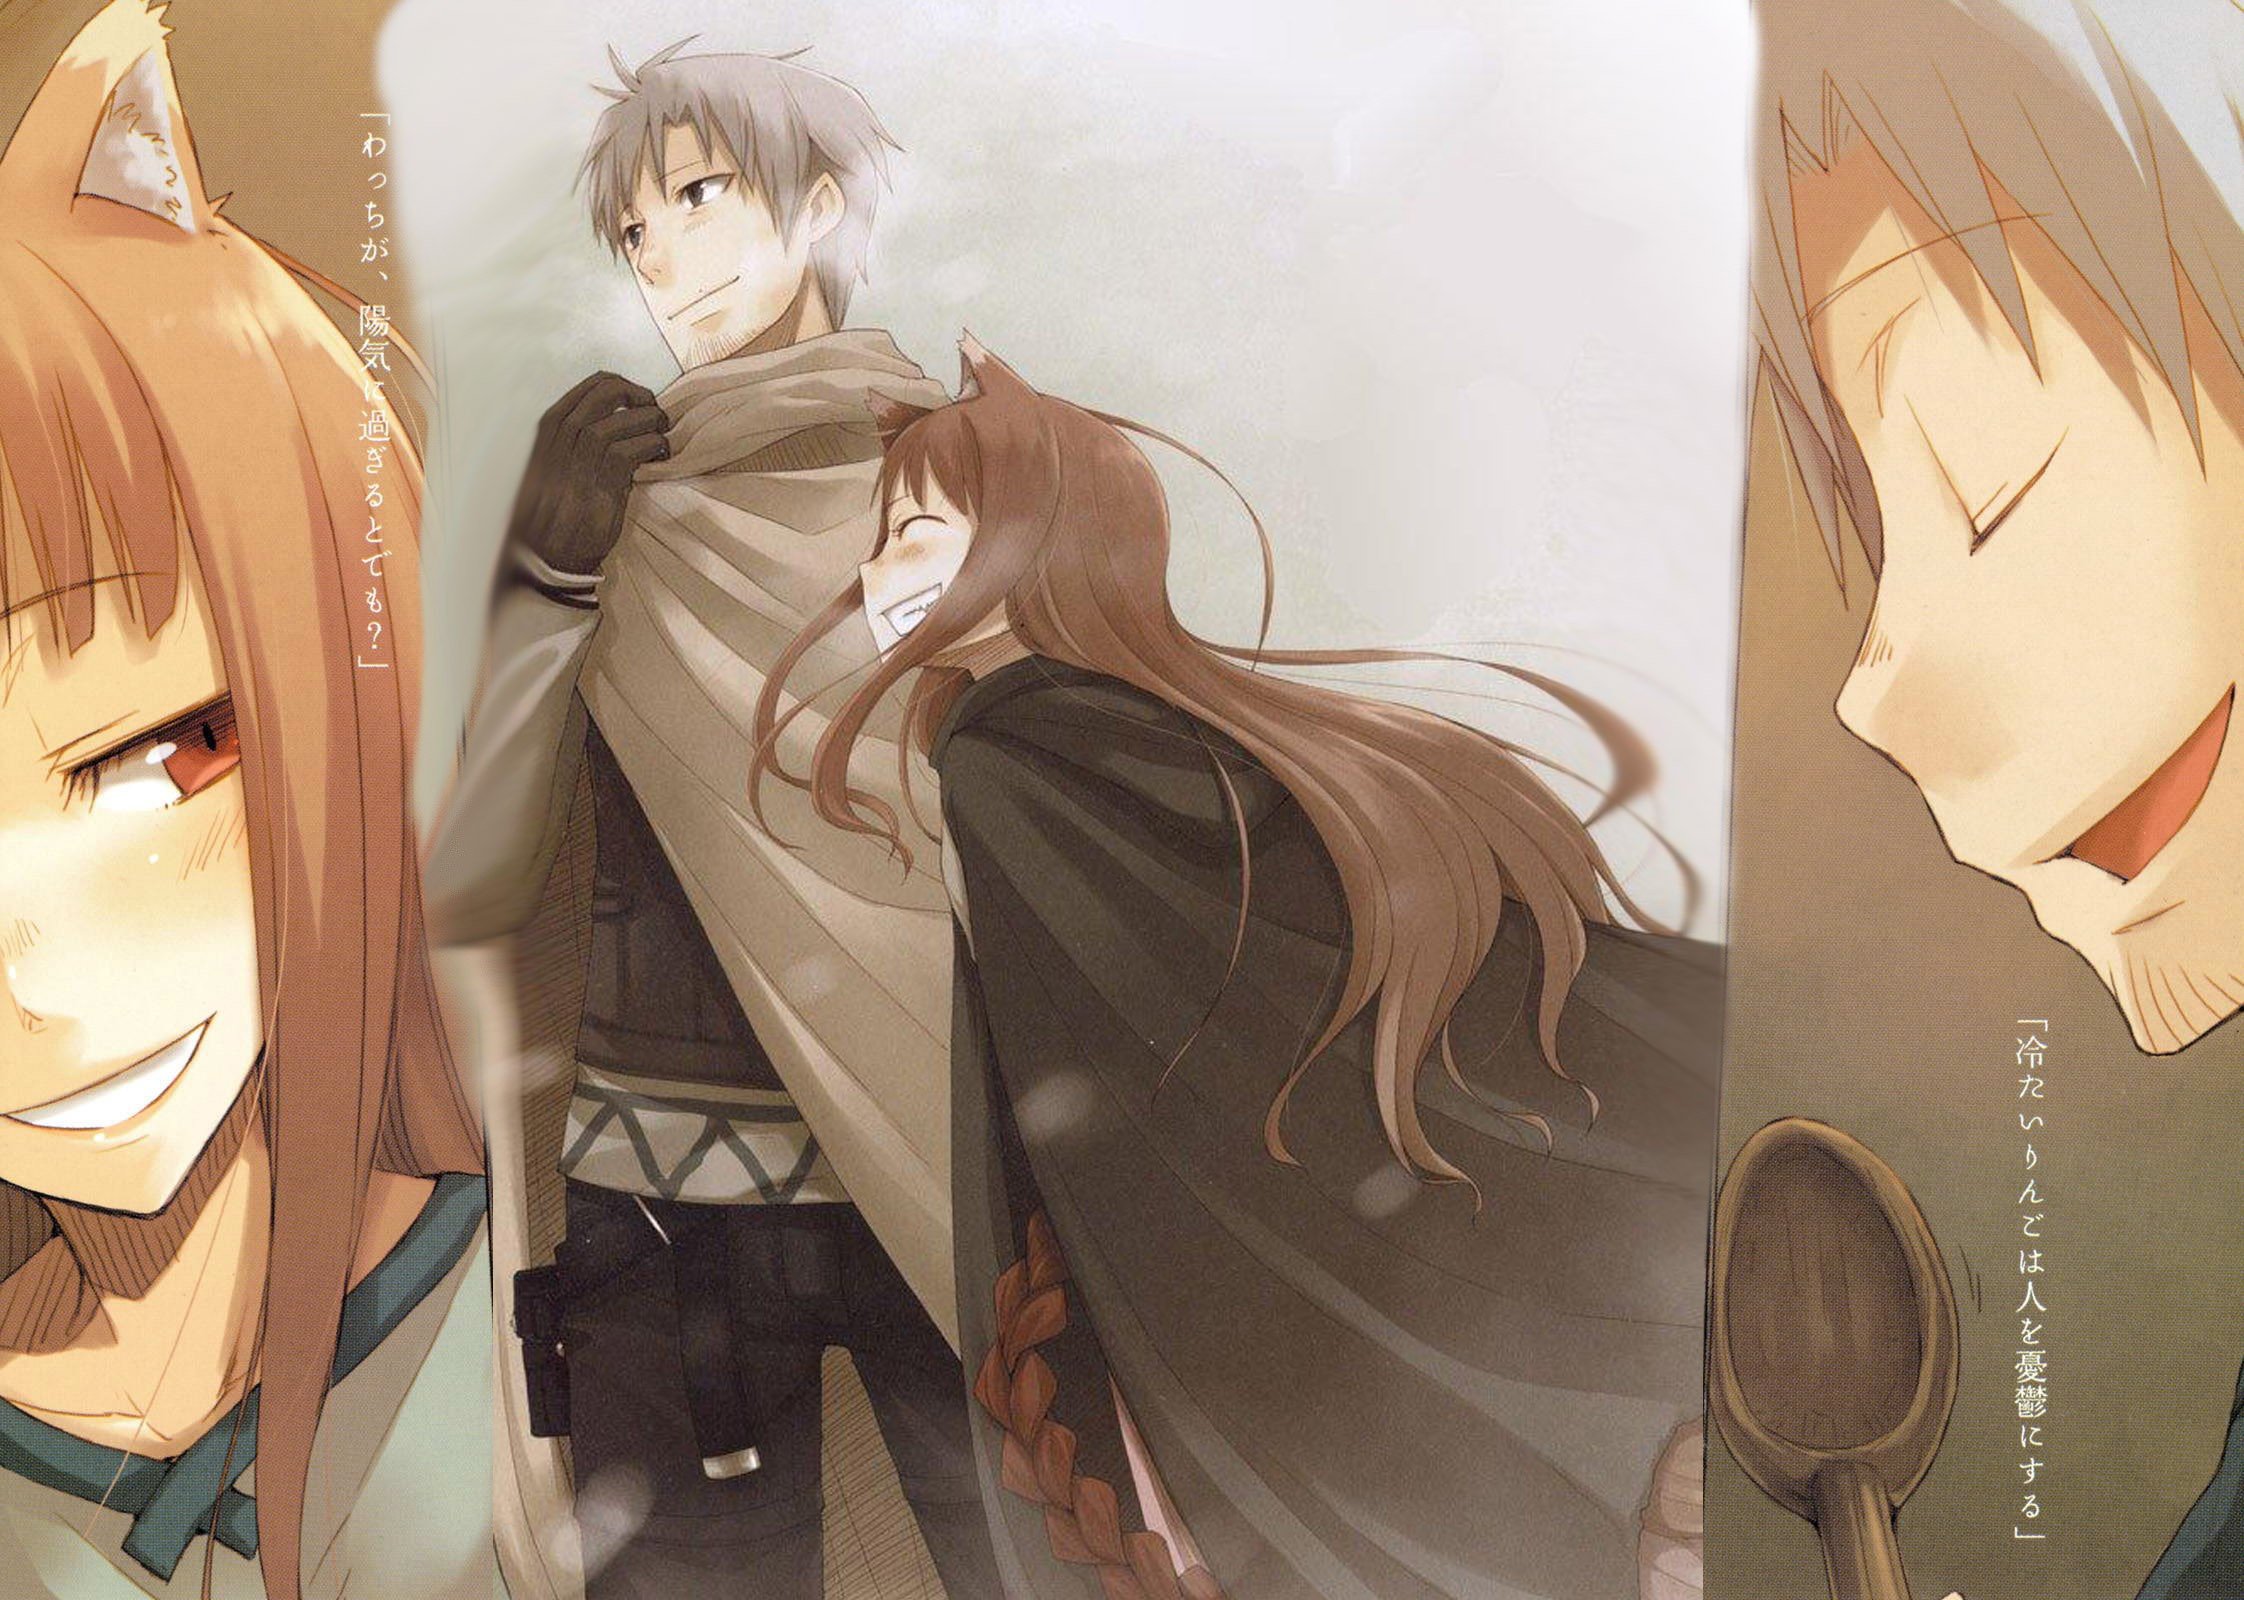 Lawrence Kraft, Spice and Wolf, Holo Wallpaper